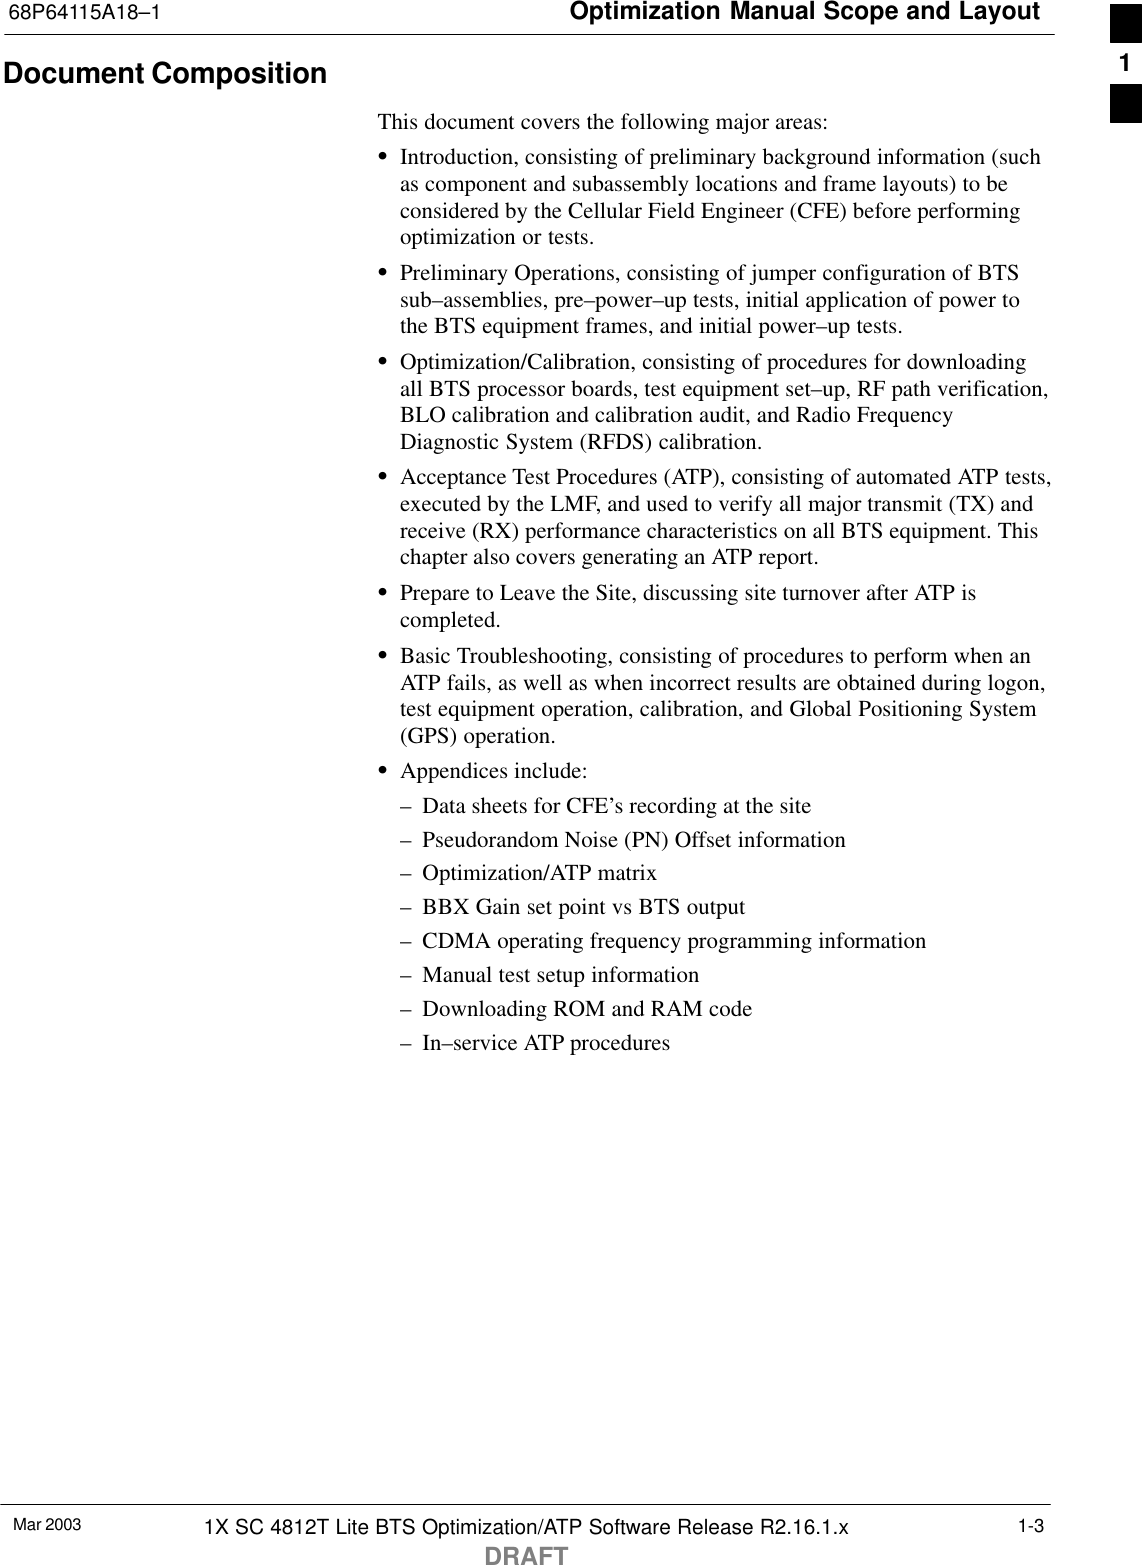 Optimization Manual Scope and Layout68P64115A18–1Mar 2003 1X SC 4812T Lite BTS Optimization/ATP Software Release R2.16.1.xDRAFT1-3Document CompositionThis document covers the following major areas:SIntroduction, consisting of preliminary background information (suchas component and subassembly locations and frame layouts) to beconsidered by the Cellular Field Engineer (CFE) before performingoptimization or tests.SPreliminary Operations, consisting of jumper configuration of BTSsub–assemblies, pre–power–up tests, initial application of power tothe BTS equipment frames, and initial power–up tests.SOptimization/Calibration, consisting of procedures for downloadingall BTS processor boards, test equipment set–up, RF path verification,BLO calibration and calibration audit, and Radio FrequencyDiagnostic System (RFDS) calibration.SAcceptance Test Procedures (ATP), consisting of automated ATP tests,executed by the LMF, and used to verify all major transmit (TX) andreceive (RX) performance characteristics on all BTS equipment. Thischapter also covers generating an ATP report.SPrepare to Leave the Site, discussing site turnover after ATP iscompleted.SBasic Troubleshooting, consisting of procedures to perform when anATP fails, as well as when incorrect results are obtained during logon,test equipment operation, calibration, and Global Positioning System(GPS) operation.SAppendices include:– Data sheets for CFE’s recording at the site– Pseudorandom Noise (PN) Offset information– Optimization/ATP matrix– BBX Gain set point vs BTS output– CDMA operating frequency programming information– Manual test setup information– Downloading ROM and RAM code– In–service ATP procedures1